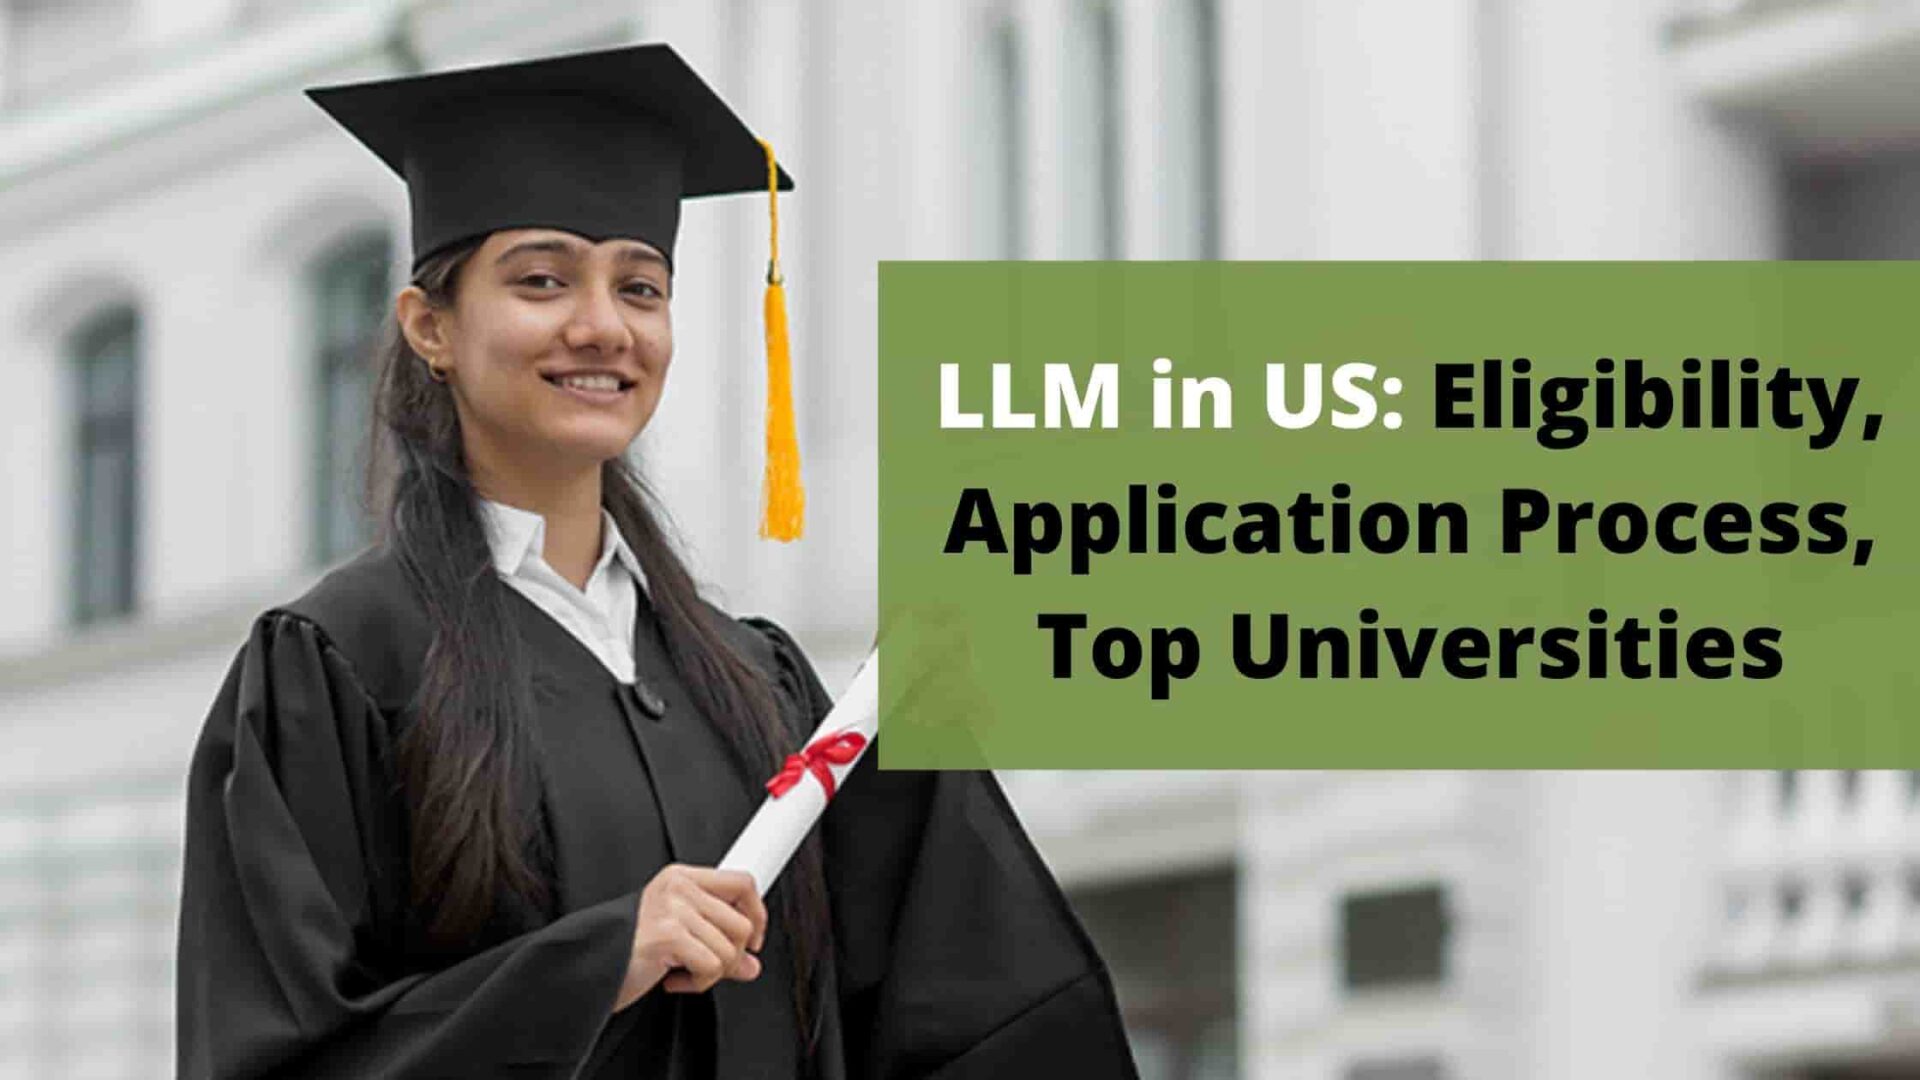 LLM in US: Eligibility, Application Process, Top Universities